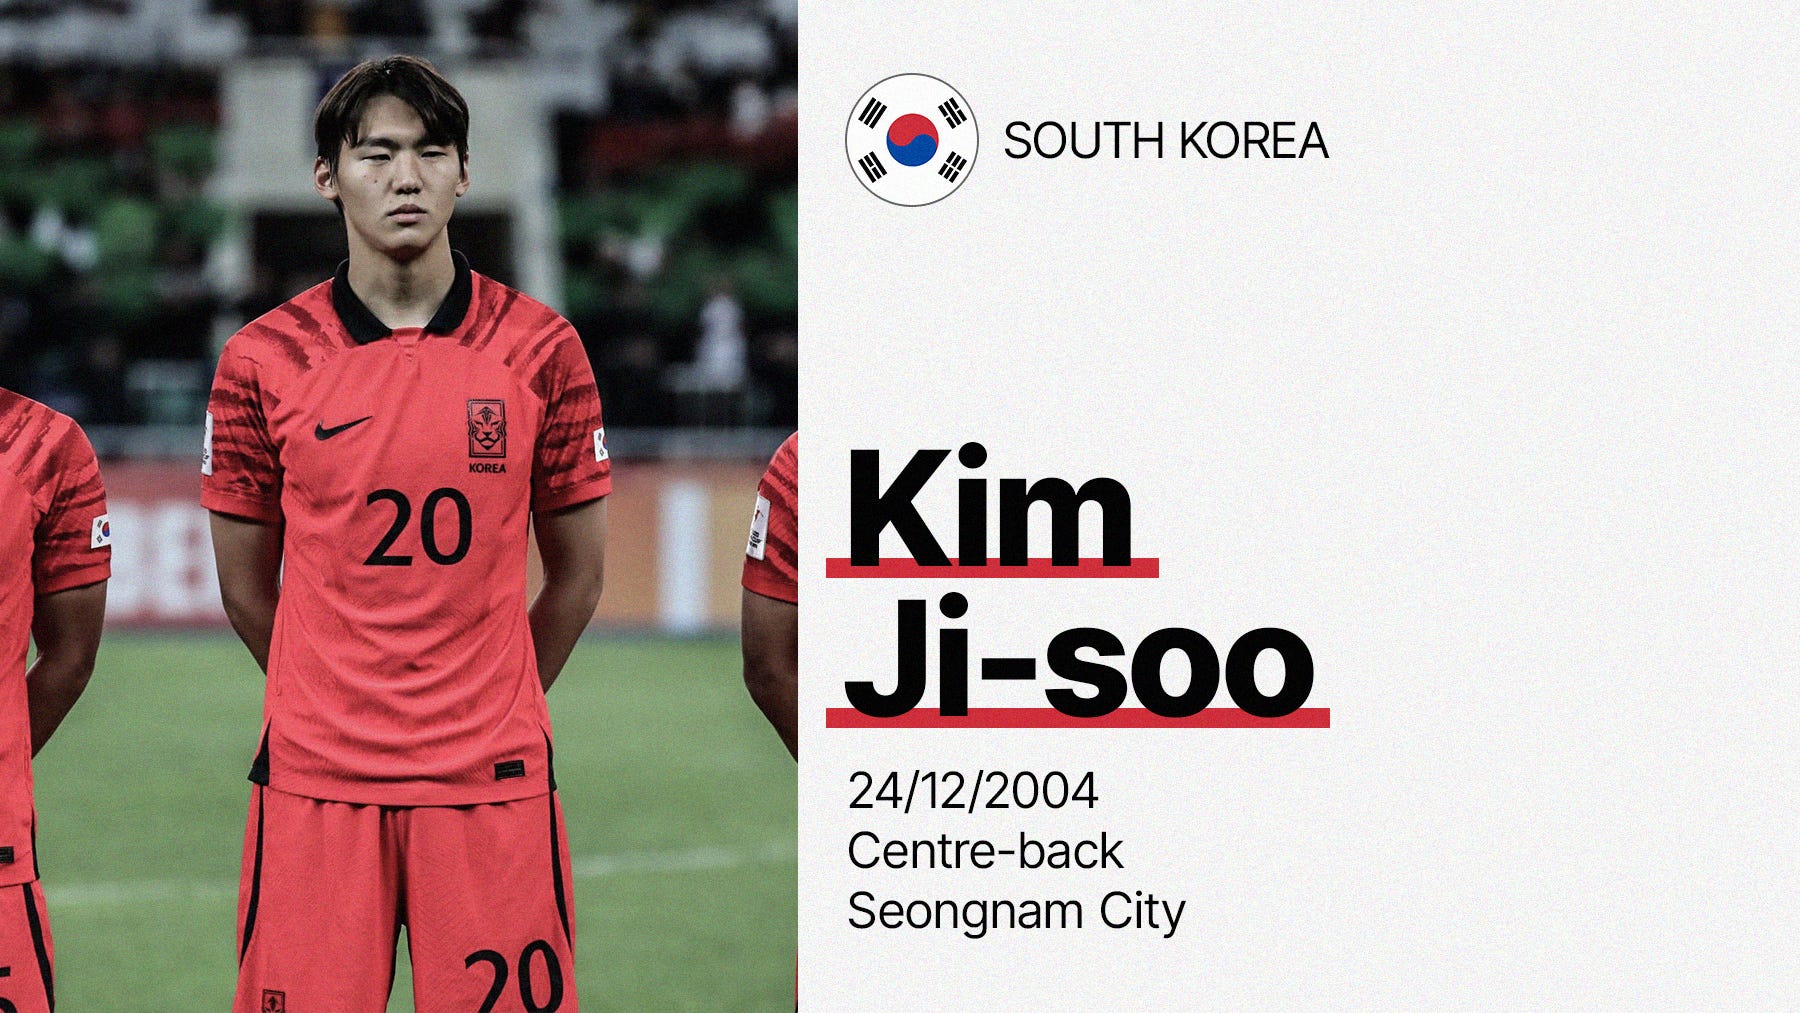 A photo of South Korea's Kim Ji-soo stood for the pre-match anthem with a brief information panel about him, including Japan flag, date of birth, position and club.